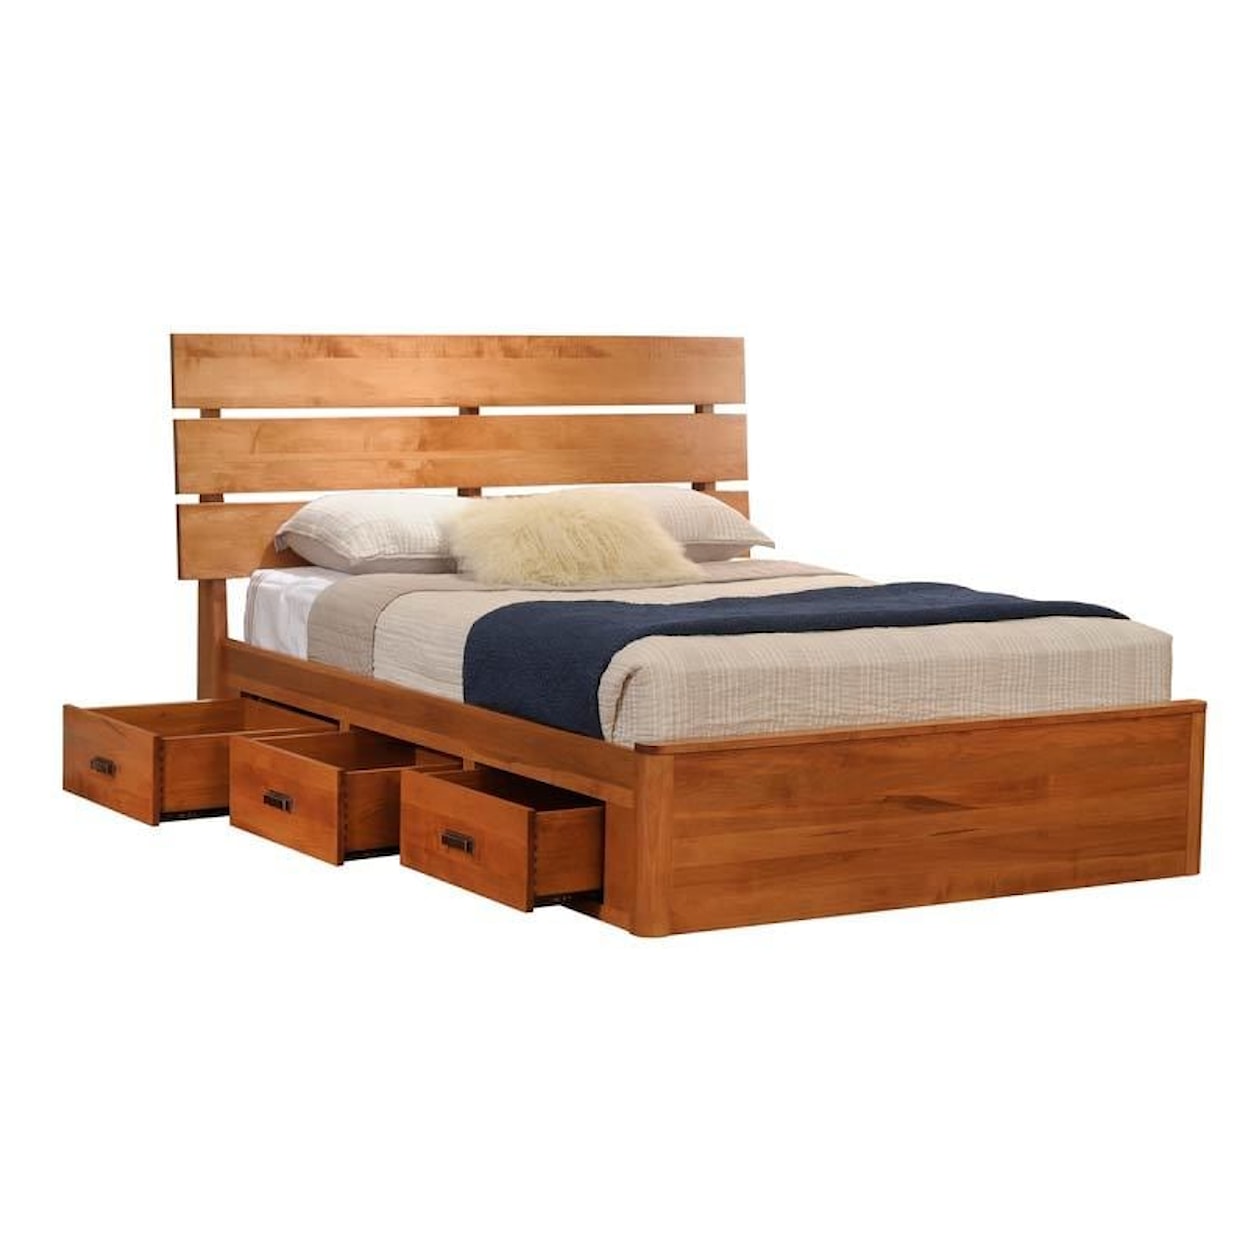 Millcraft Galaxy Full Slat Bed with 2-Drawer Units